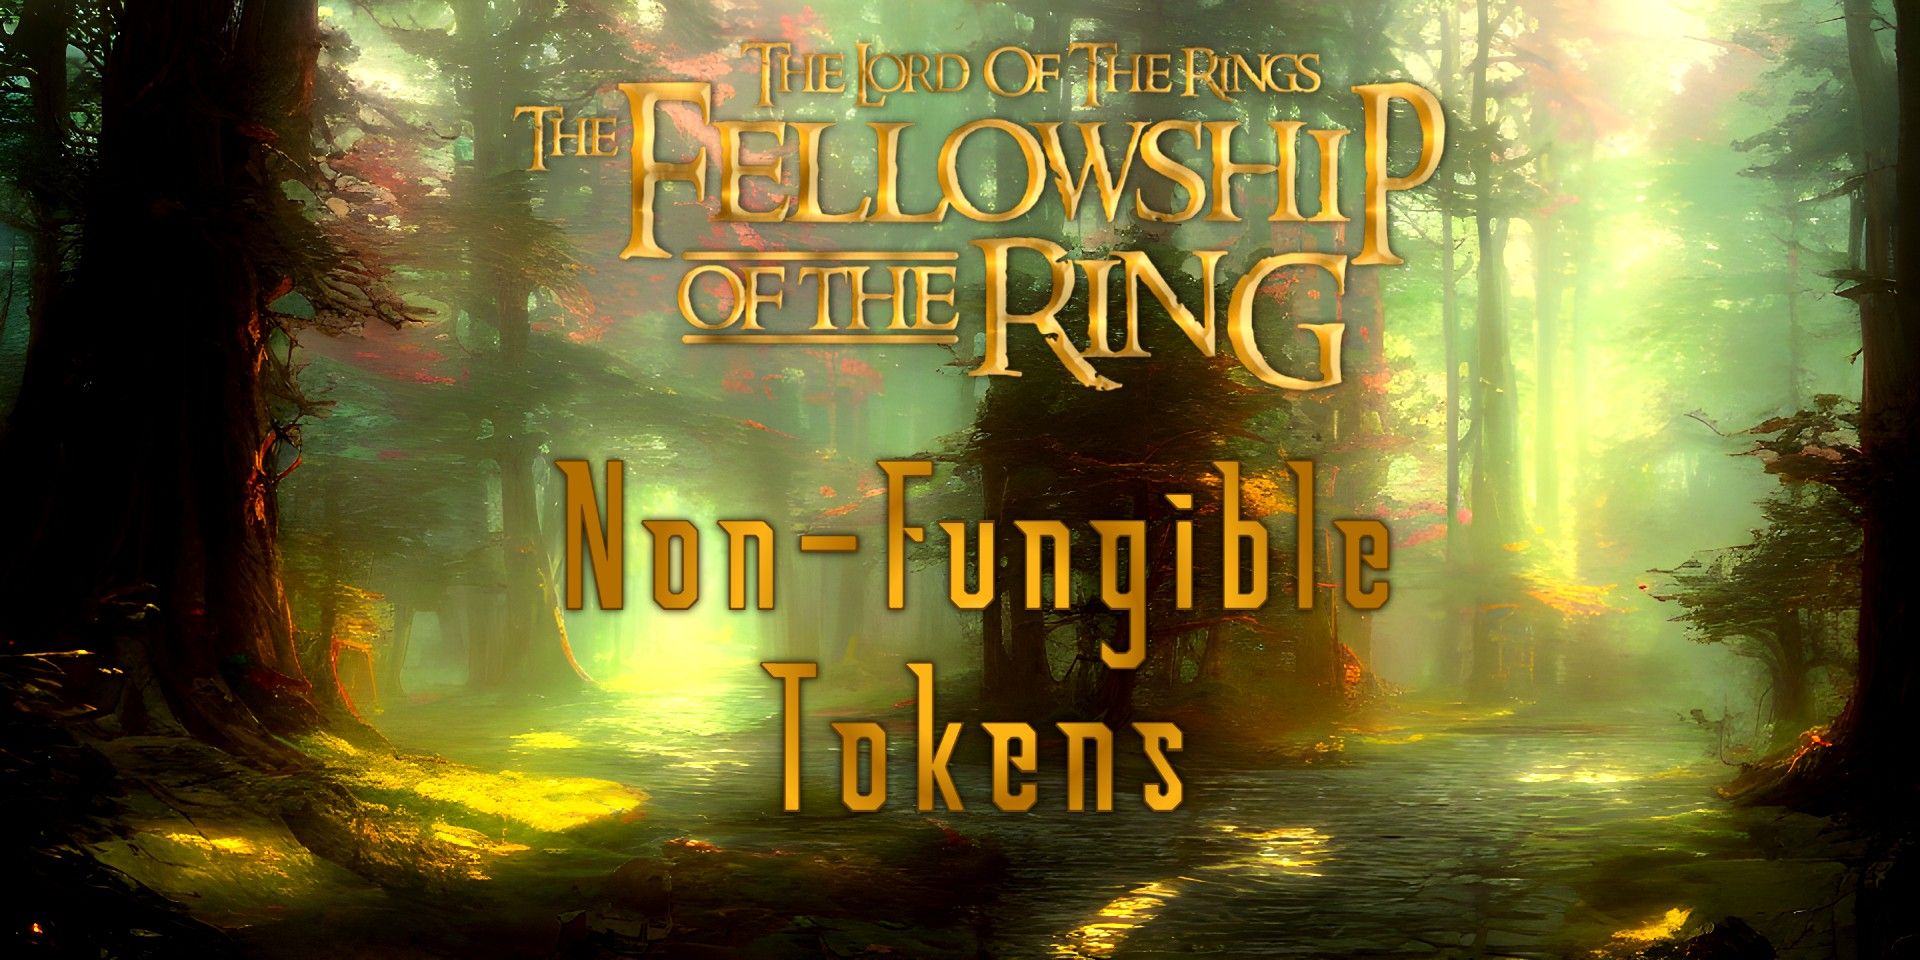 Lord Of The Rings The Fellowship Of The Ring title over fantasy forest background, with text 